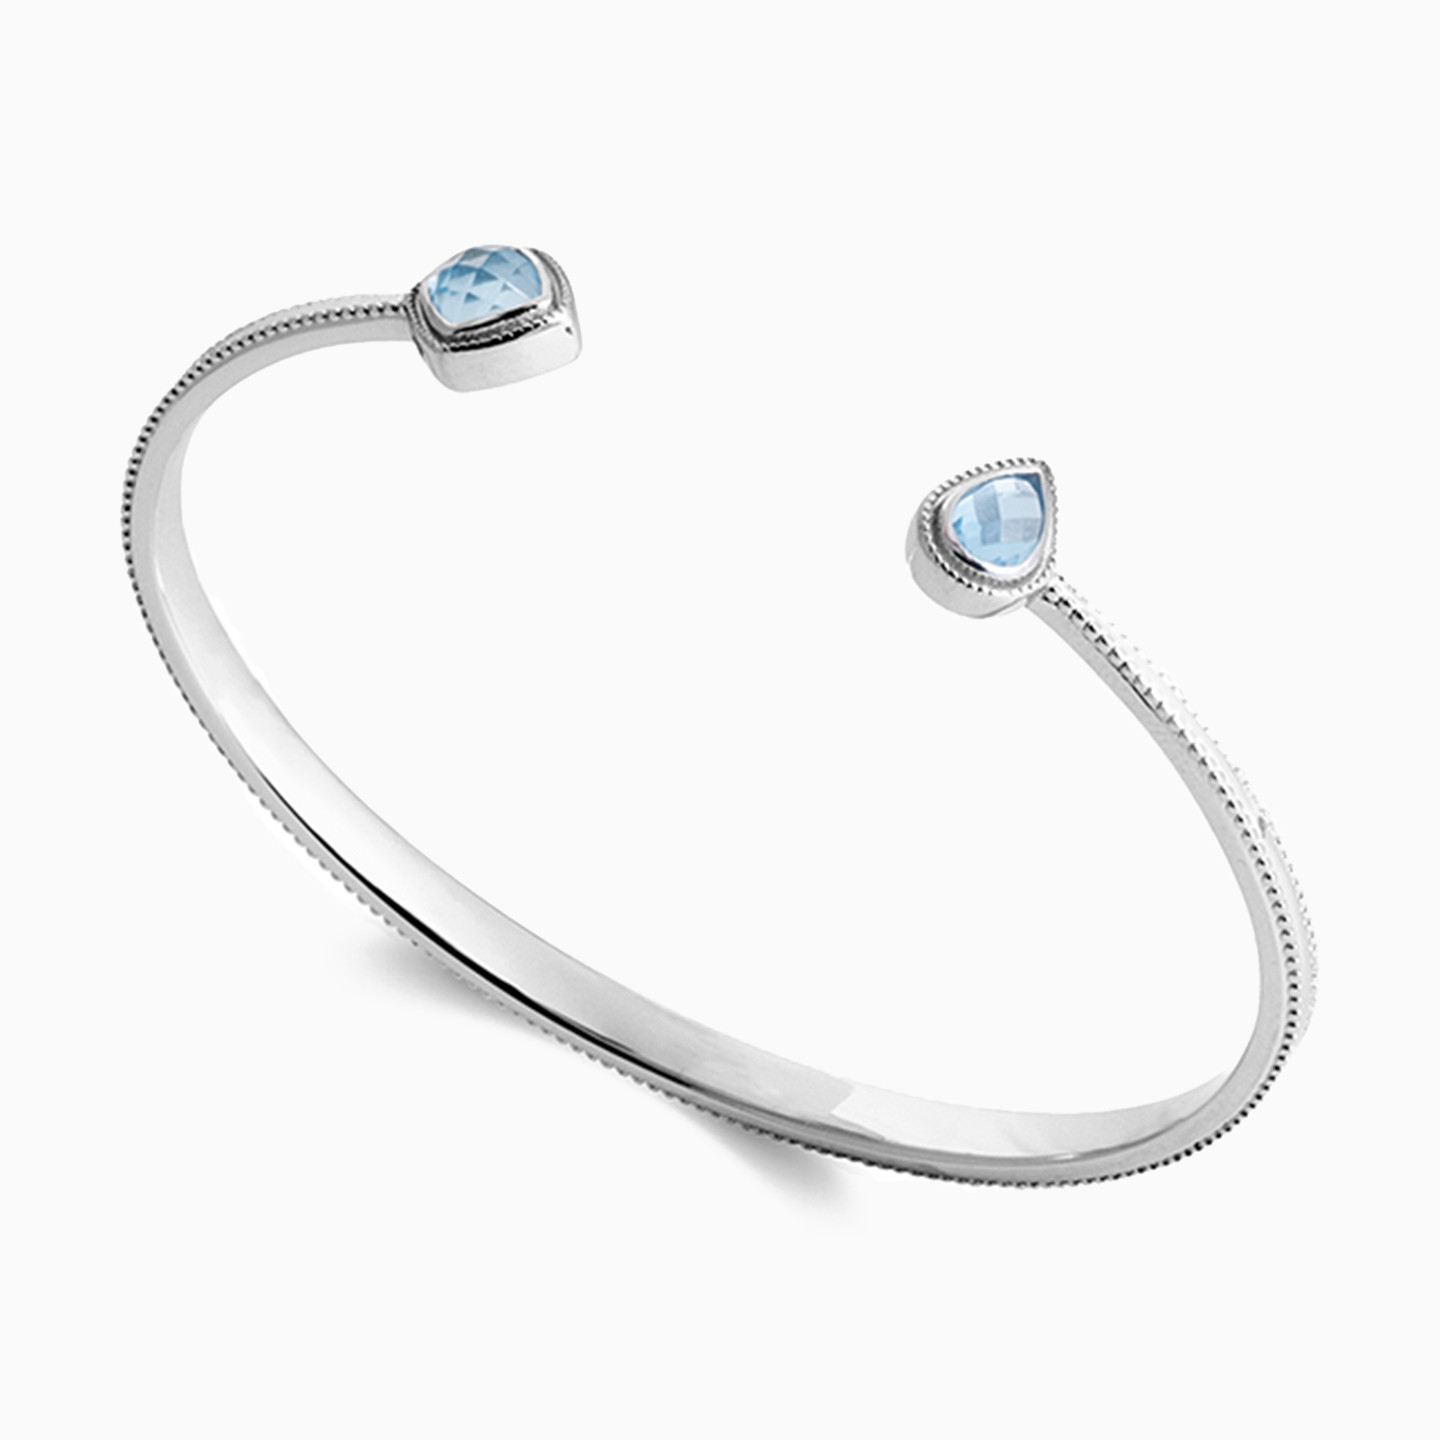 Sterling Silver Colored Stones Cuff Bracelet